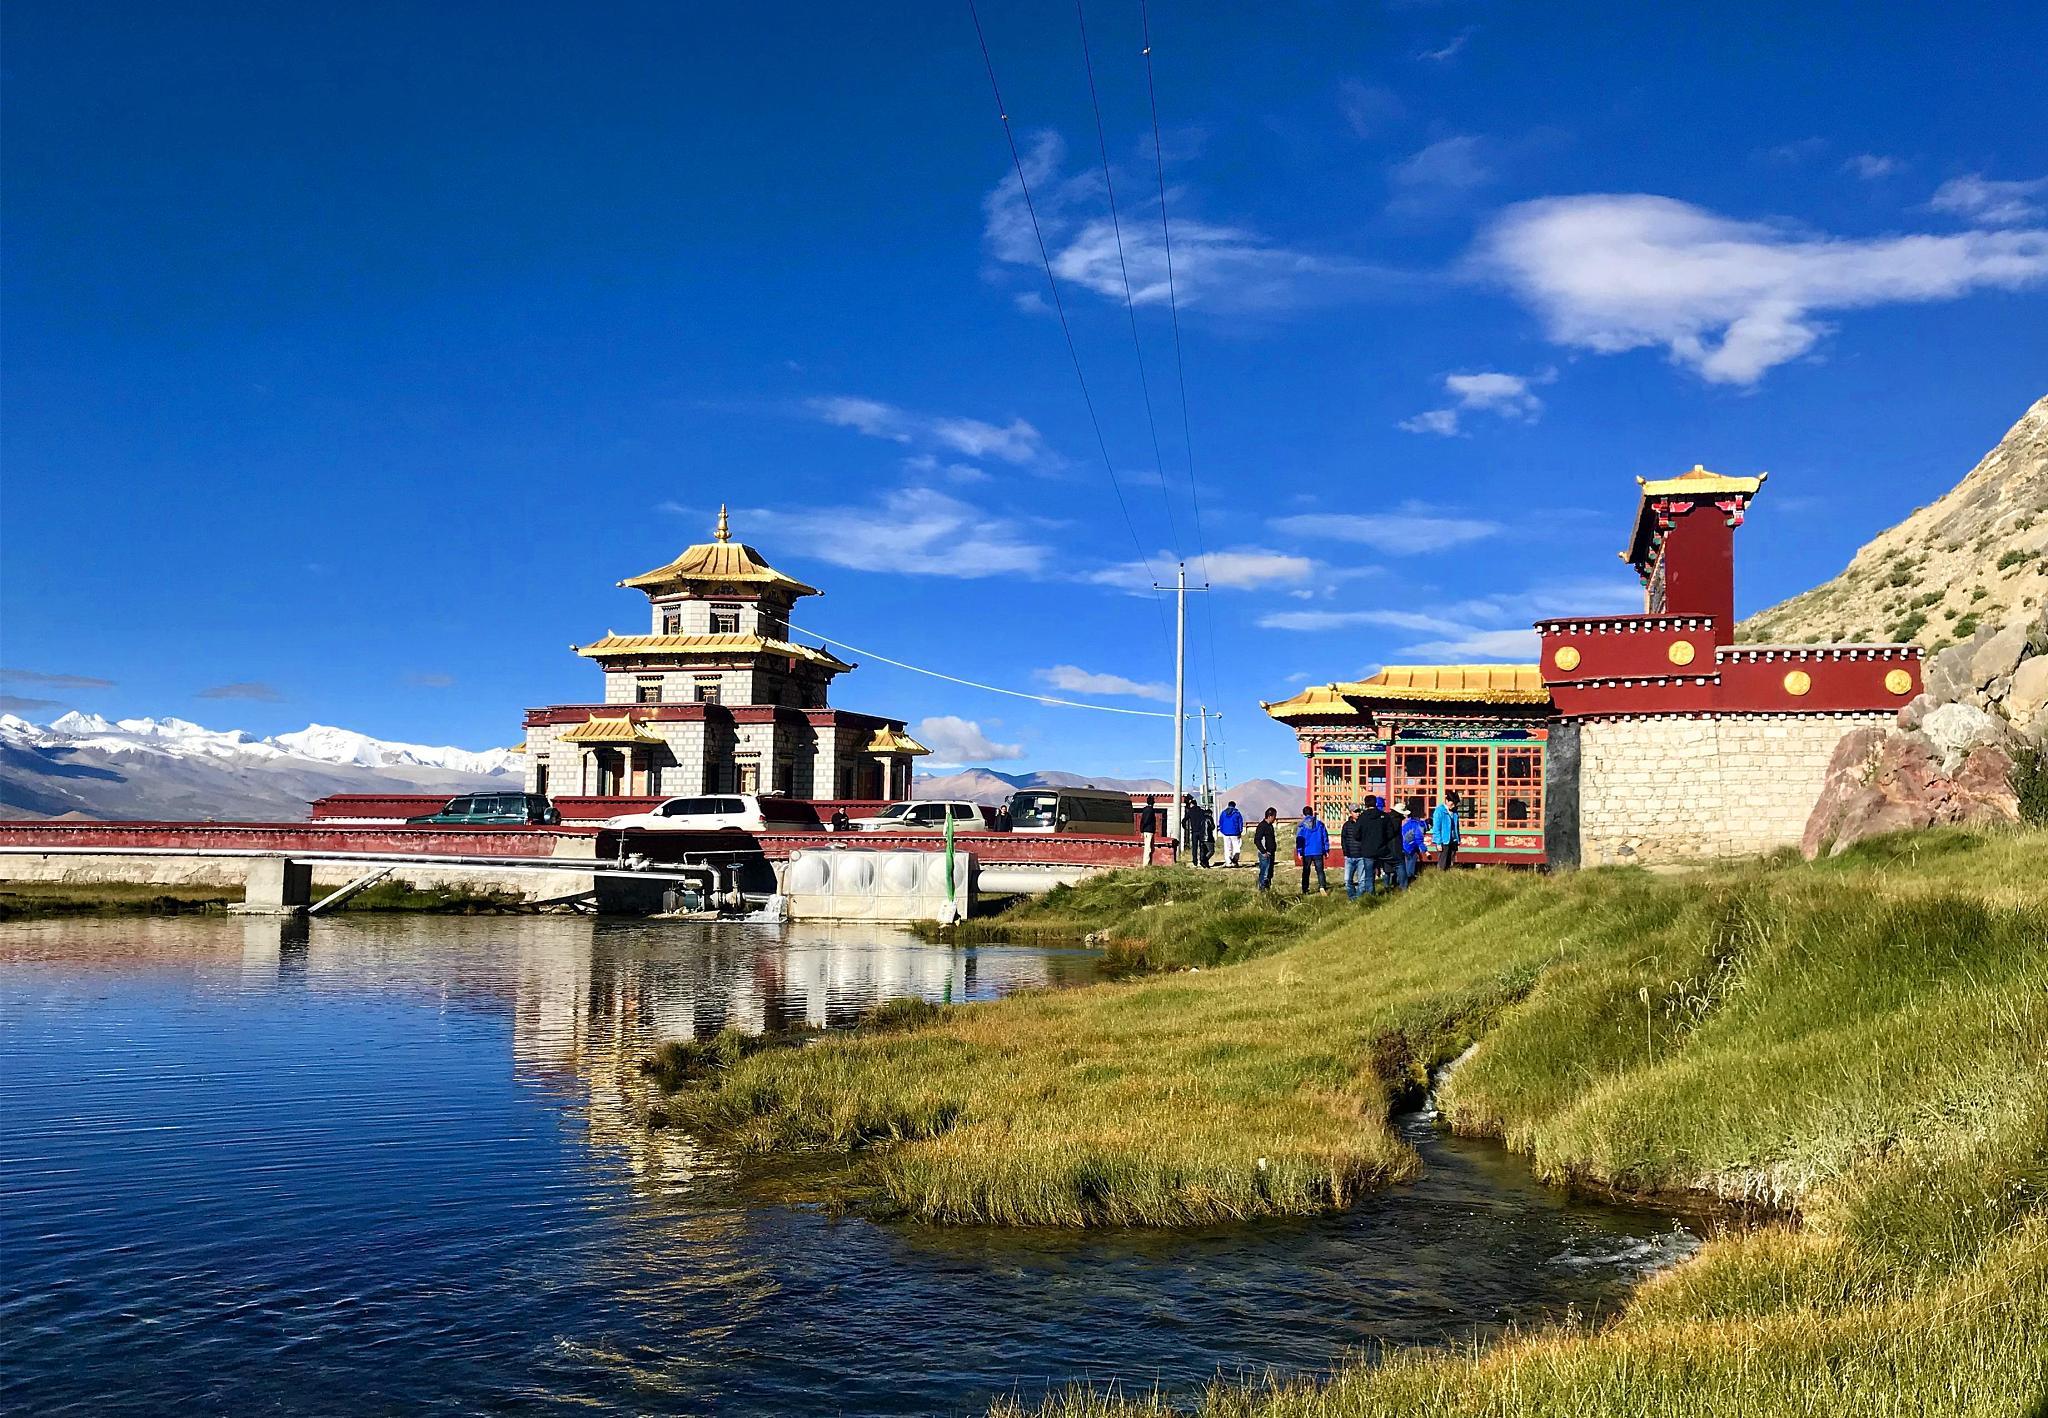 The springs at Tingri County, Xigaze City, Tibetan Autonomous Region provide clean water for 80 poverty-hit local households.